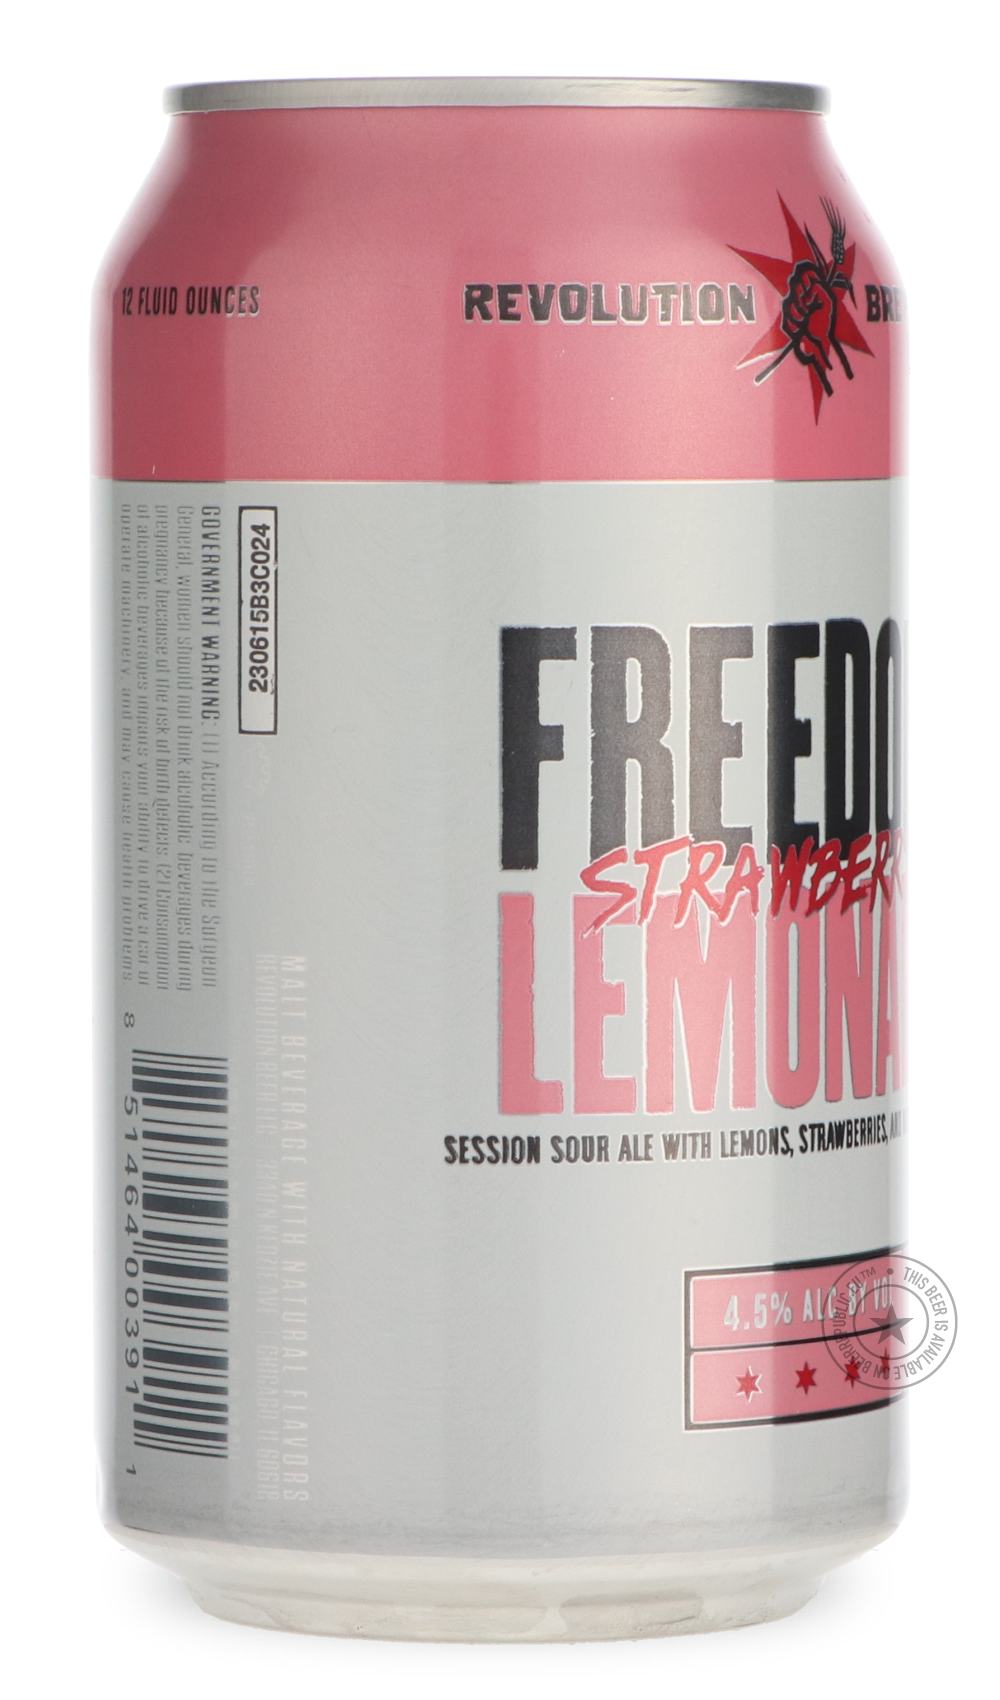 -Revolution- Freedom Strawberry Lemonade-Sour / Wild & Fruity- Only @ Beer Republic - The best online beer store for American & Canadian craft beer - Buy beer online from the USA and Canada - Bier online kopen - Amerikaans bier kopen - Craft beer store - Craft beer kopen - Amerikanisch bier kaufen - Bier online kaufen - Acheter biere online - IPA - Stout - Porter - New England IPA - Hazy IPA - Imperial Stout - Barrel Aged - Barrel Aged Imperial Stout - Brown - Dark beer - Blond - Blonde - Pilsner - Lager - 